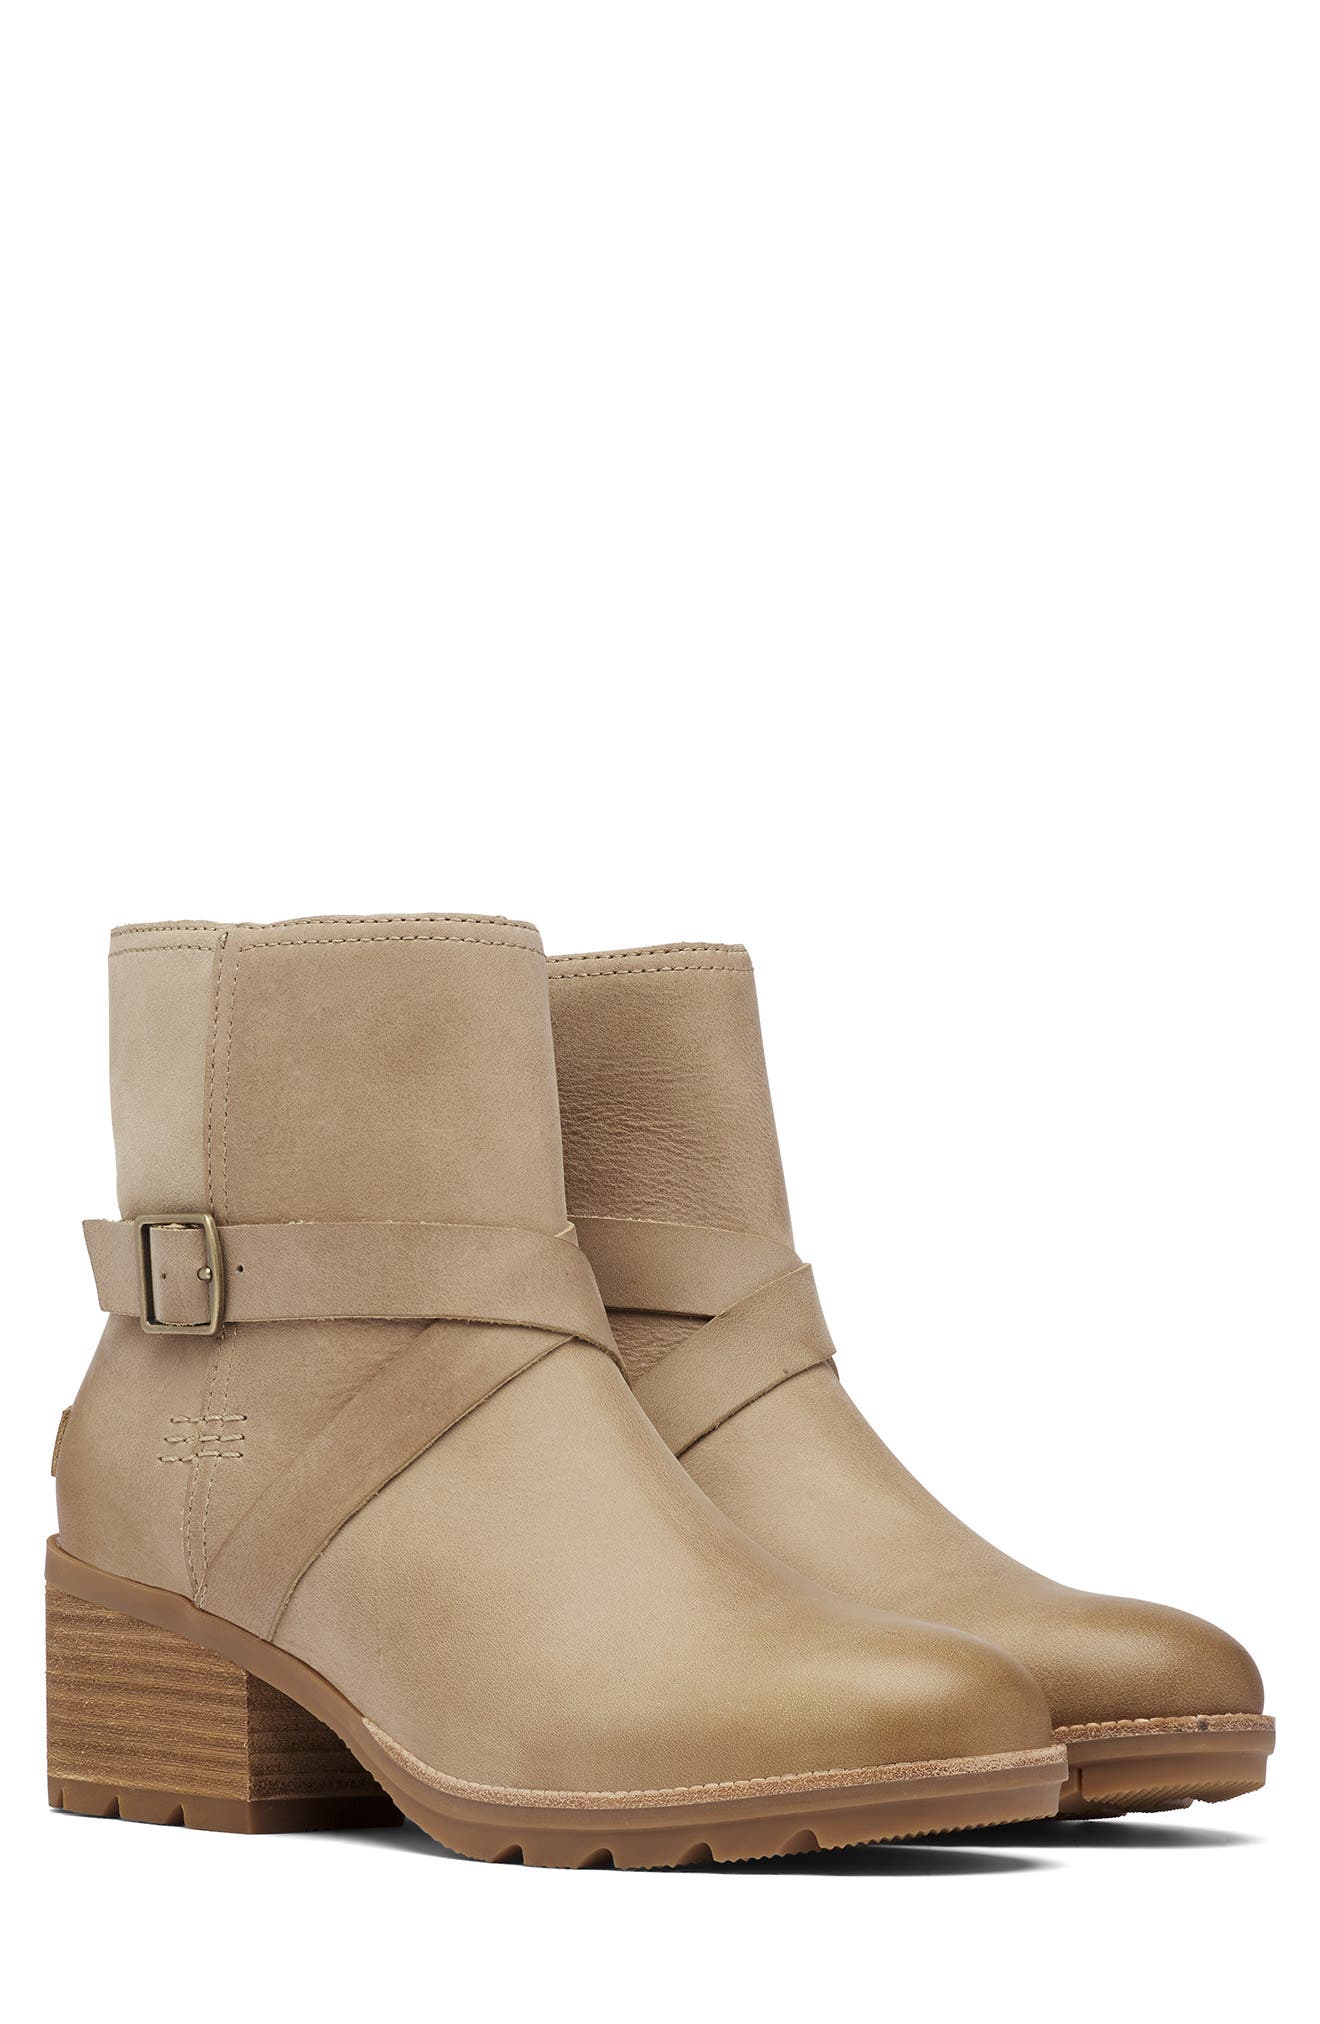 Sorel Cate Leather Buckle Bootie In Sandy Tan | ModeSens